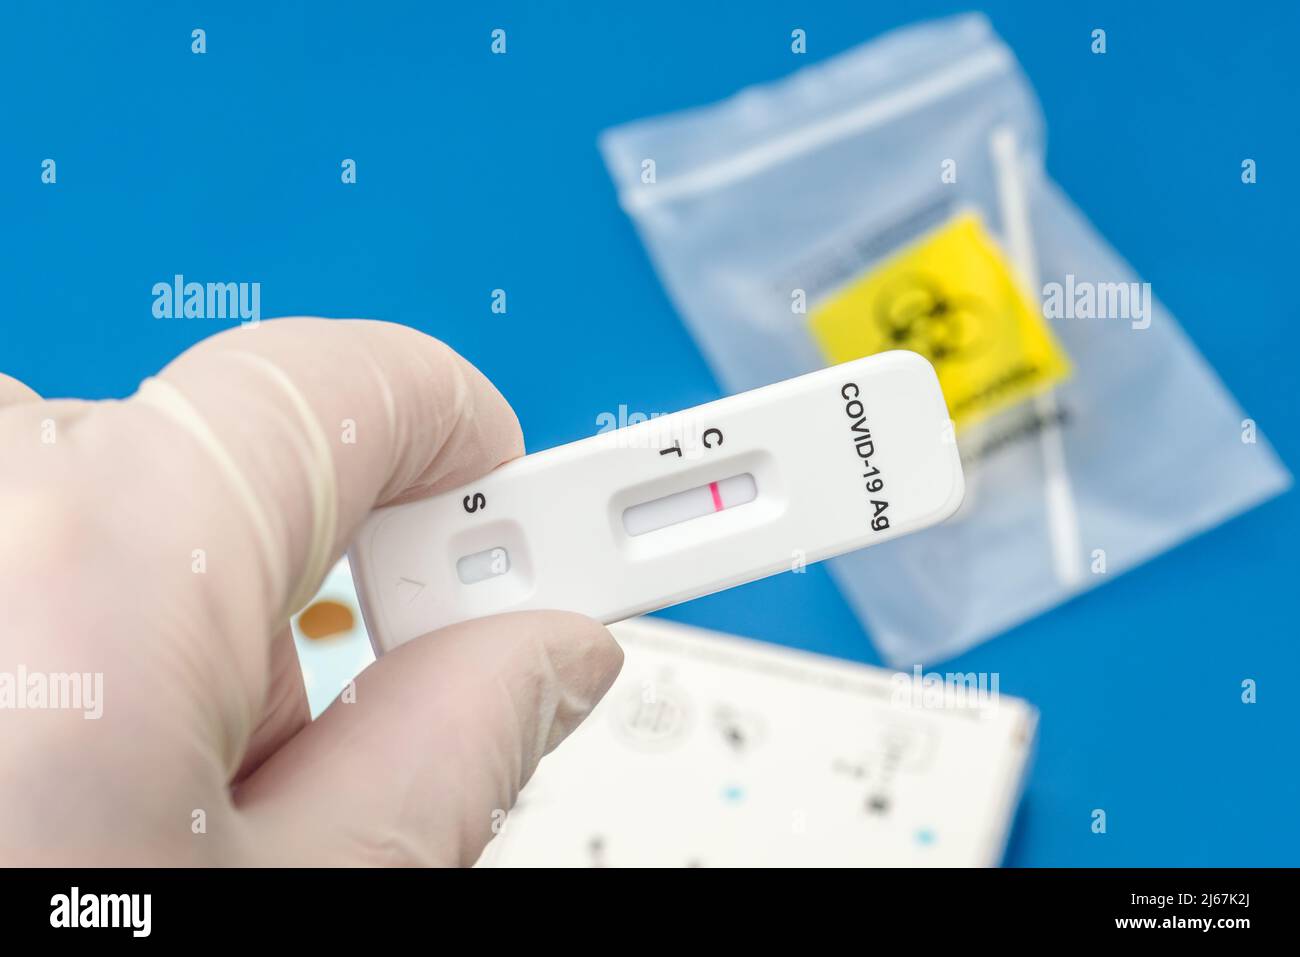 Gloved hand holding a SARS-Cov-2 antigen test strip showing a negative result. A nasal swab inside a bag is visible in background. Stock Photo